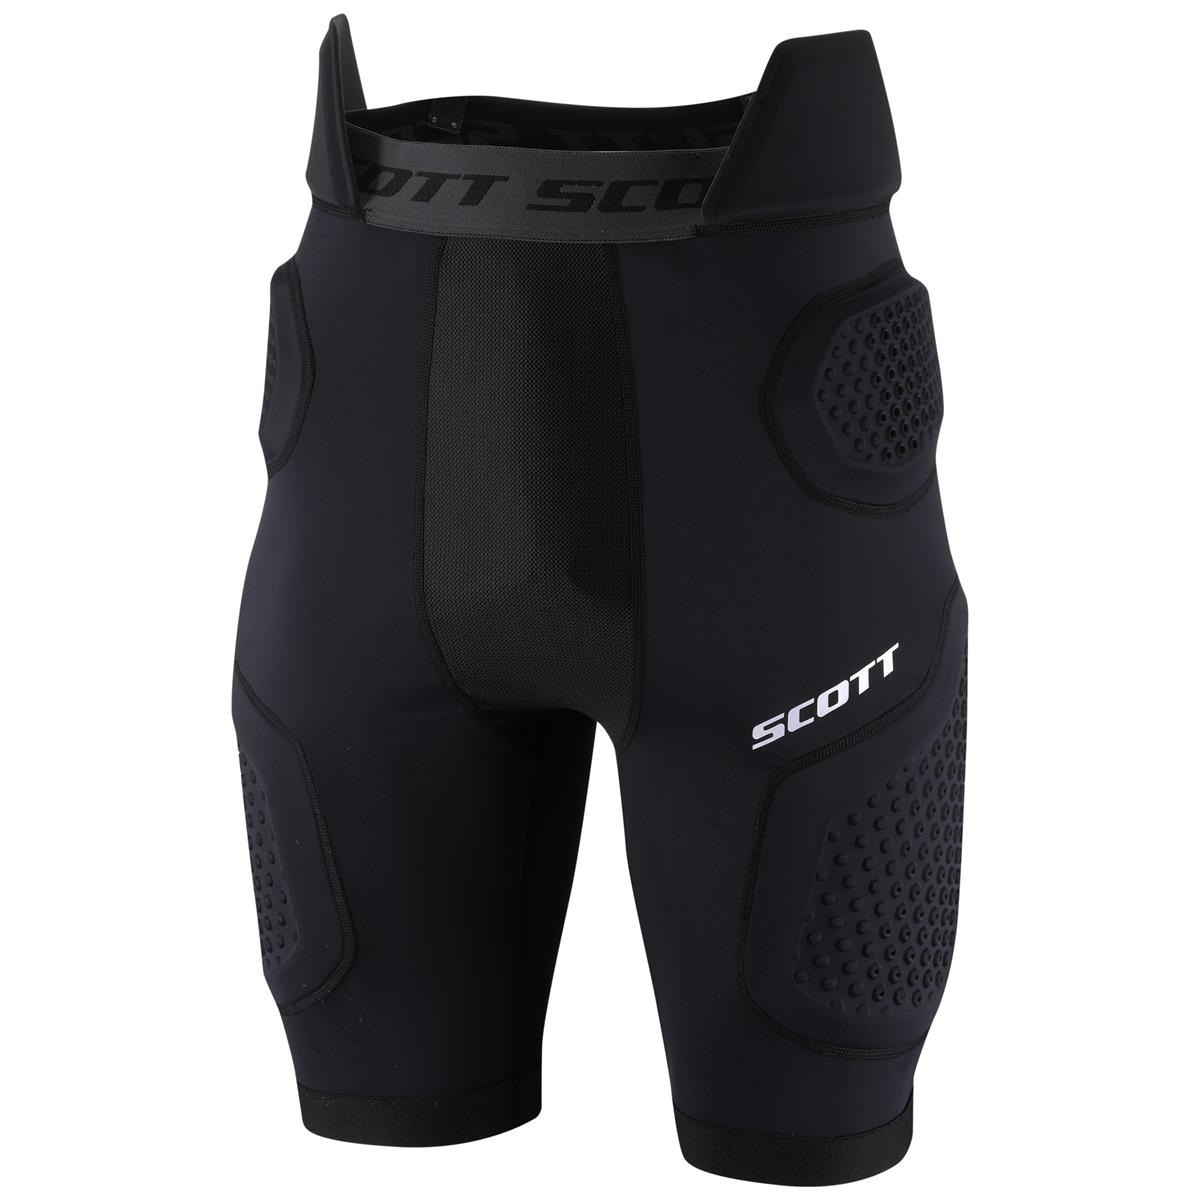 Short protector Softcon air black - Size S